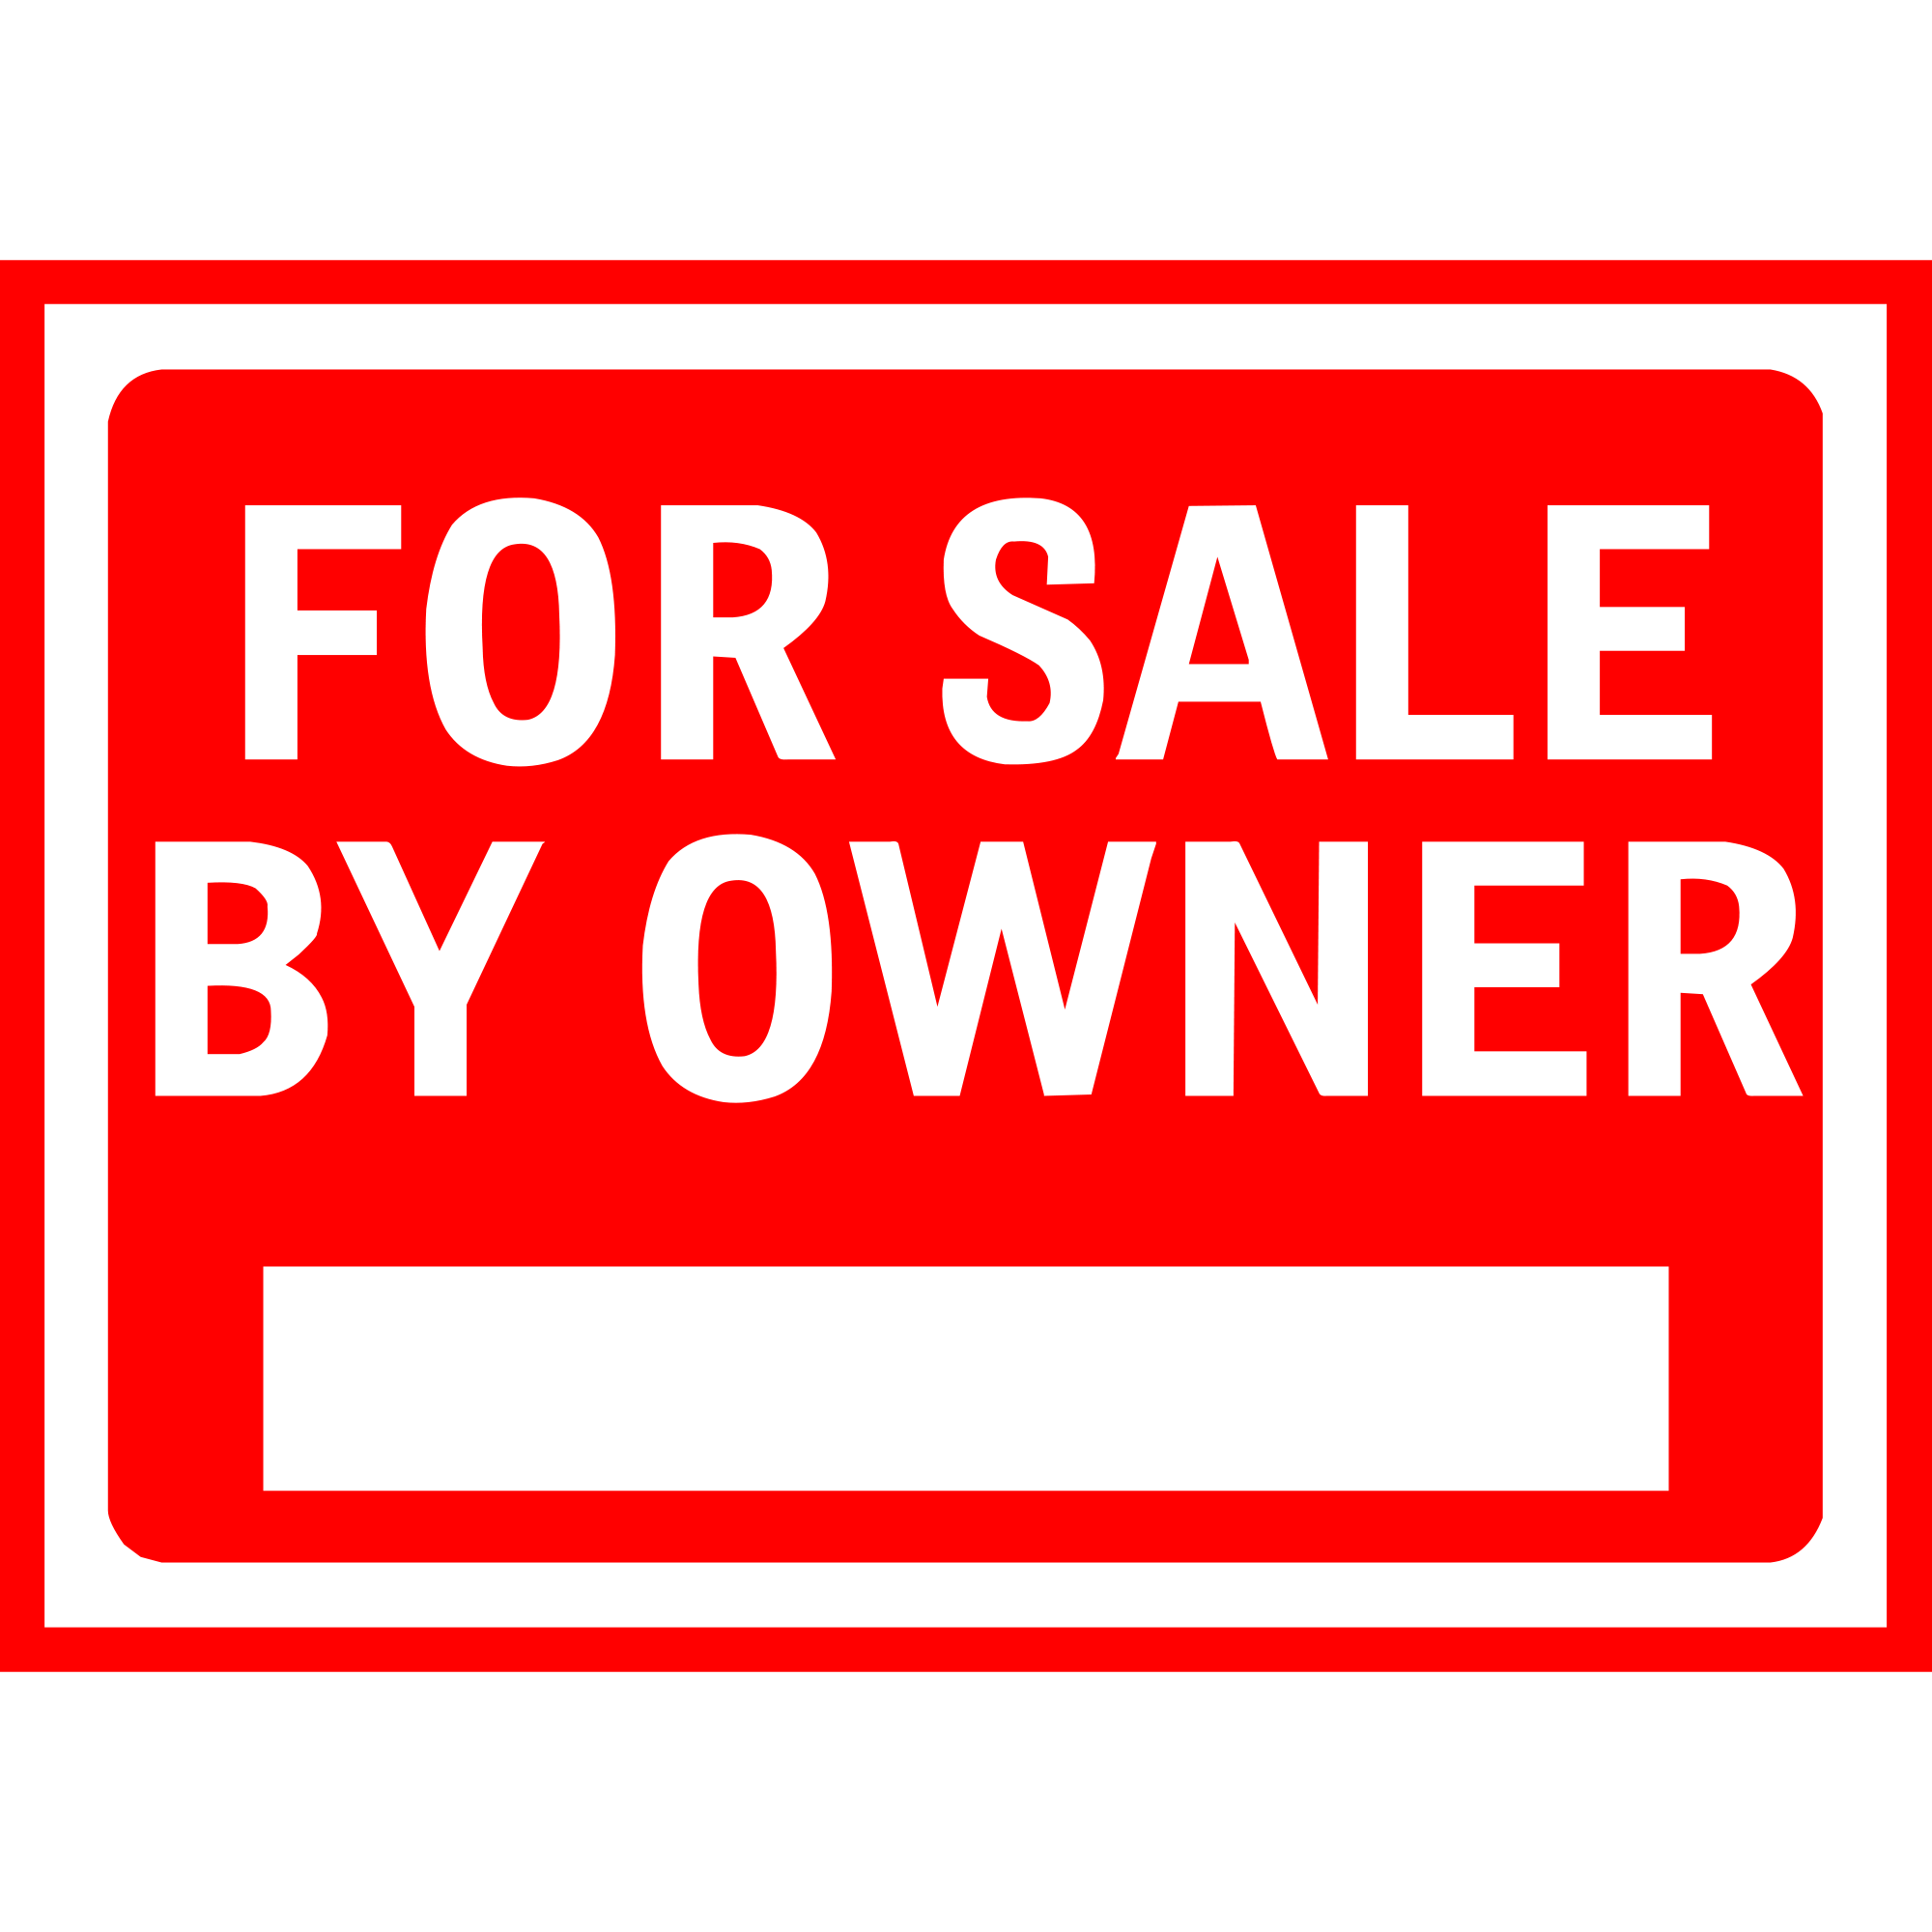 Car For Sale Sign Template Car For Sale Sign Vehicle for Sale Year